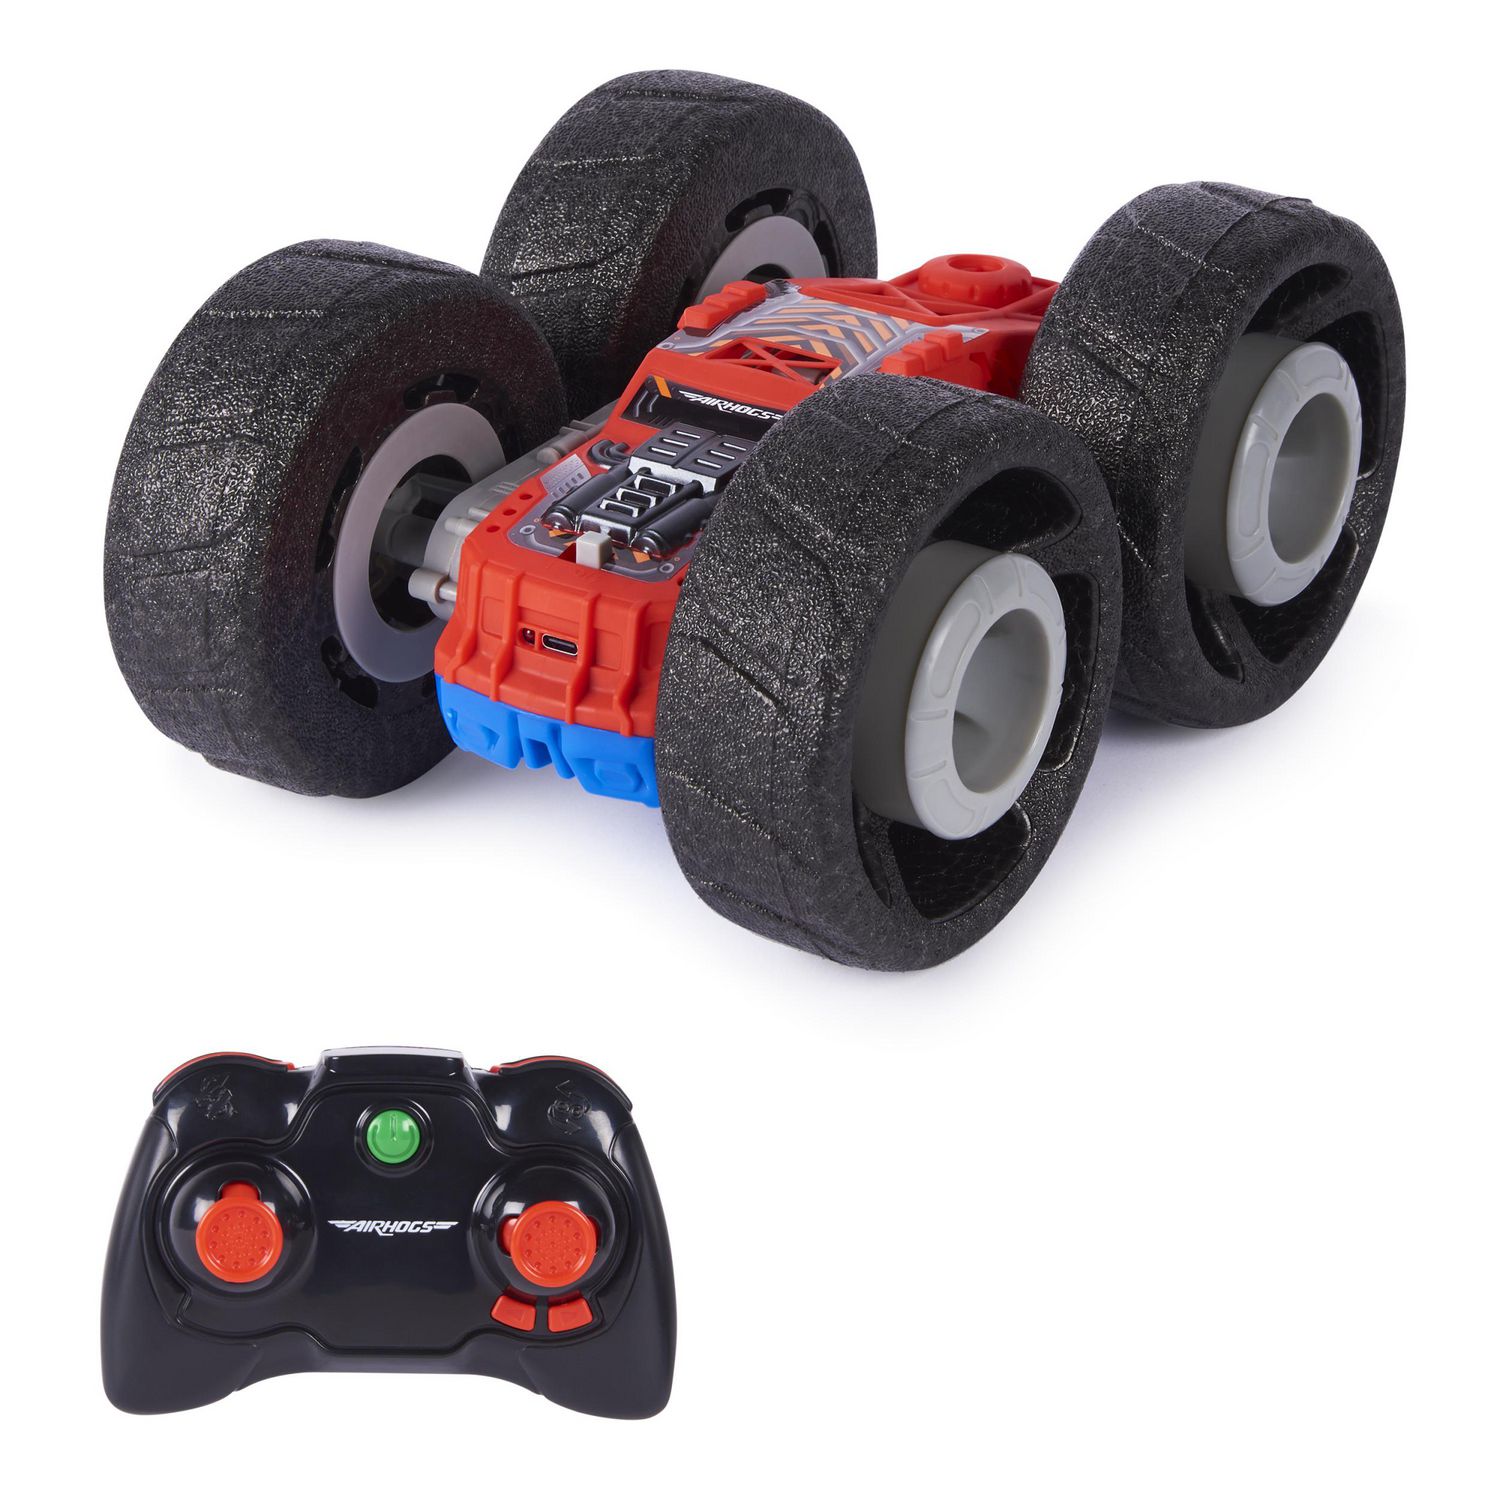 Air Hogs Super Soft, Flippin' Frenzy, 360 Spinning Action, 2-in-1 Stunt  Vehicle Remote Control Car, Kids Toys for Kids and up